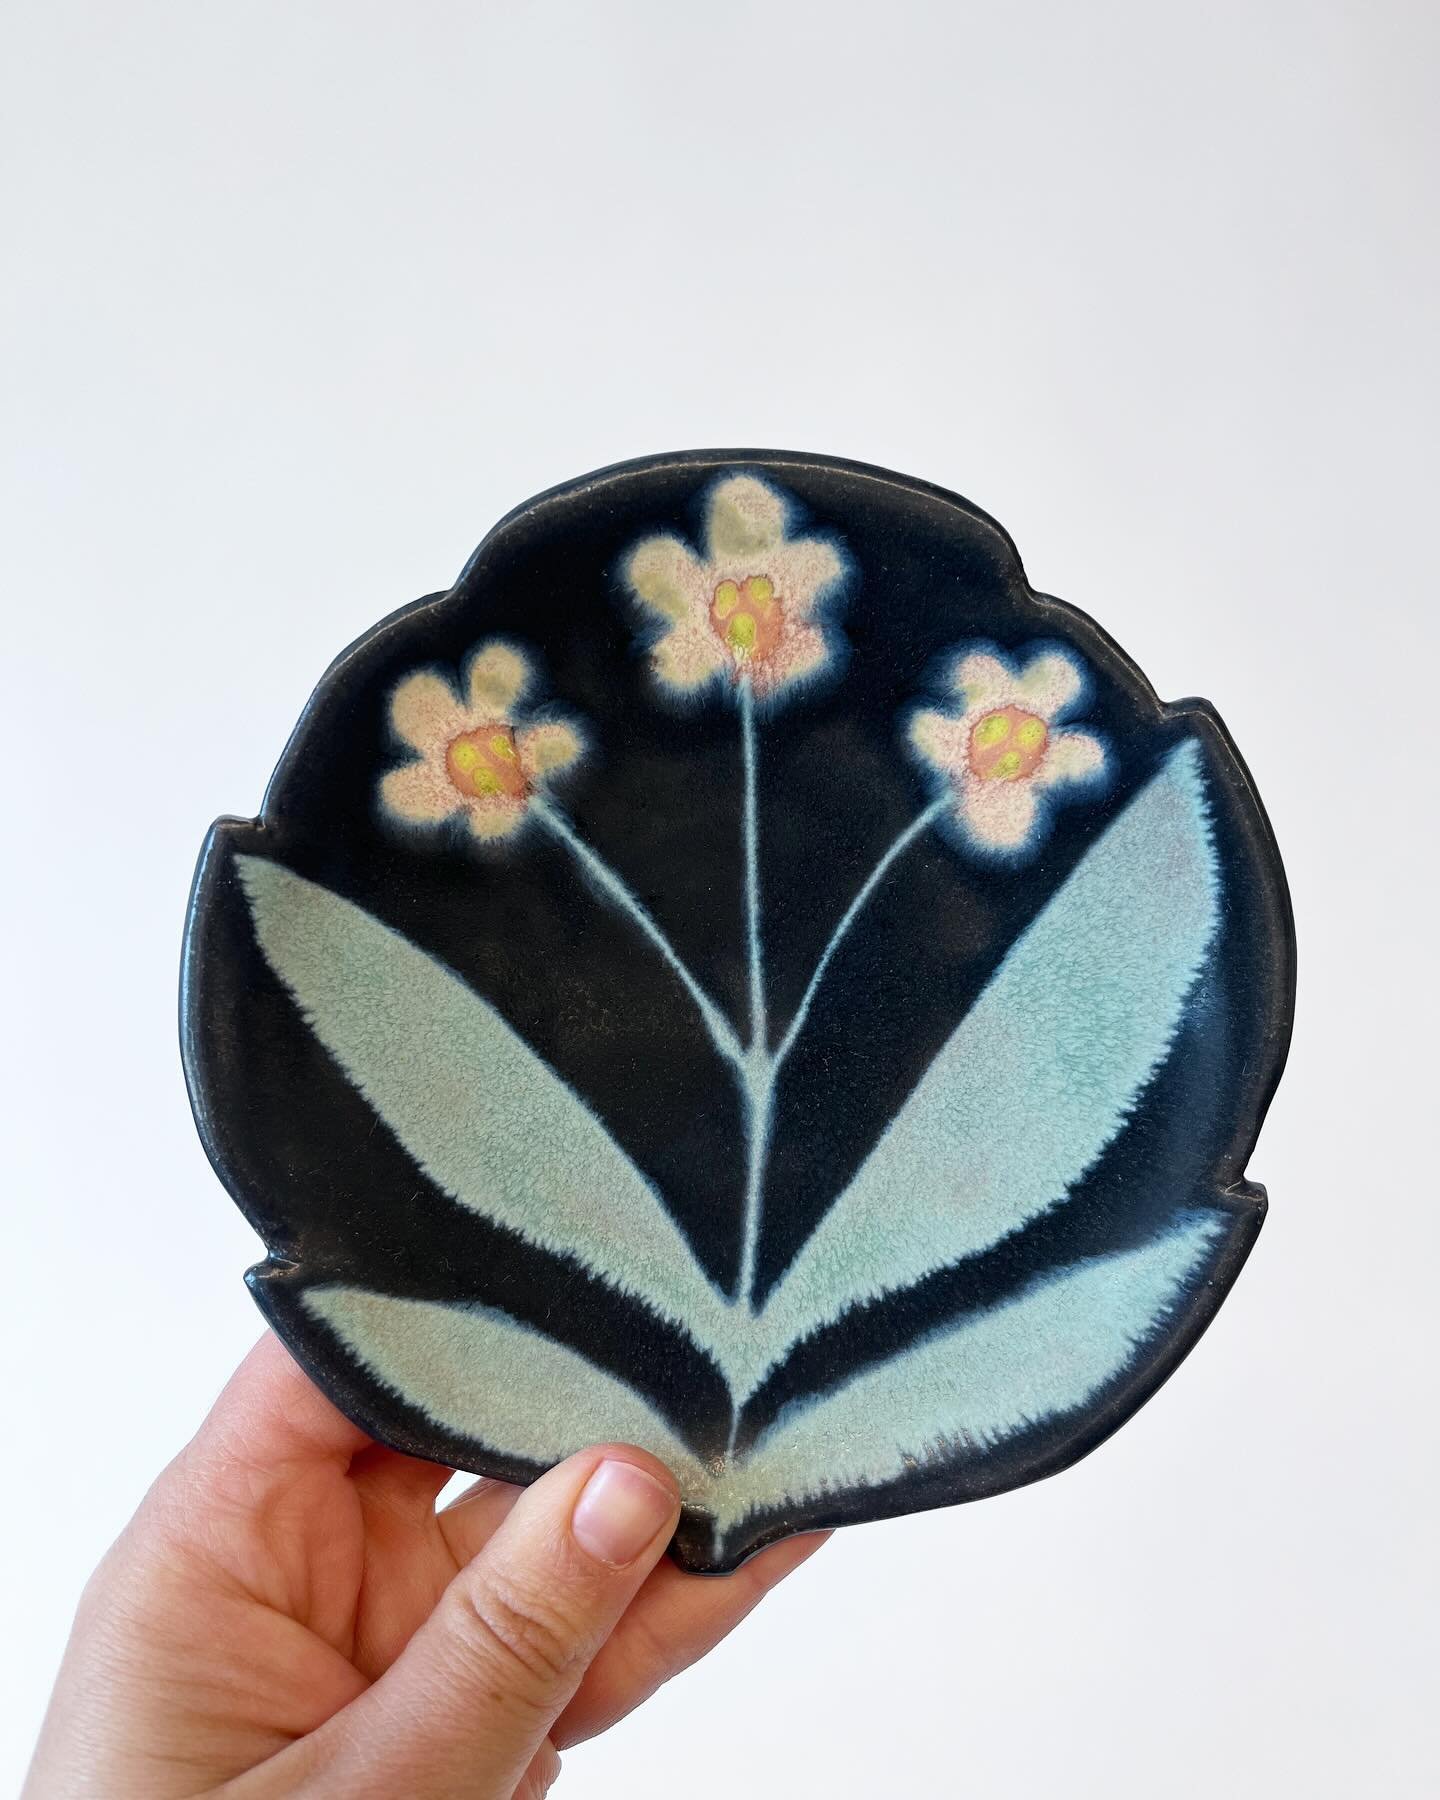 These are the first batch of flower dessert plates. Different from my hand built wall flowers and spoon rest, these being thrown and trimmed then I cut the edge to support my future decoration. My plan is the no longer make my tiny trinket dish that 